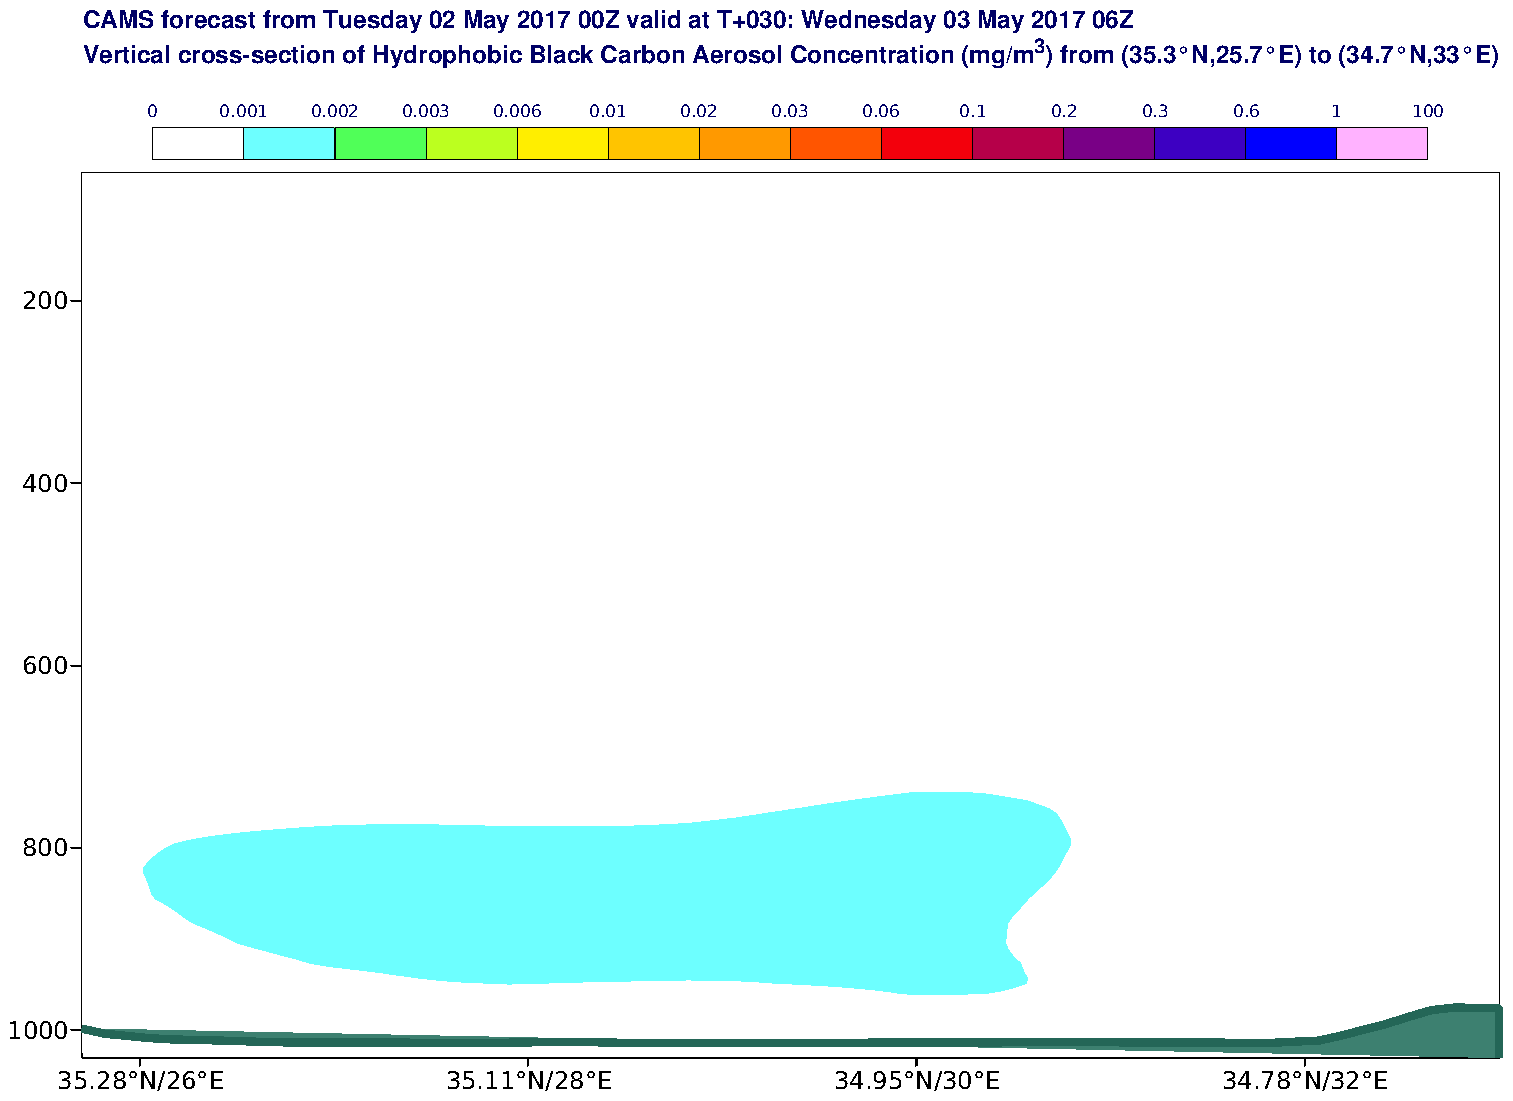 Vertical cross-section of Hydrophobic Black Carbon Aerosol Concentration (mg/m3) valid at T30 - 2017-05-03 06:00